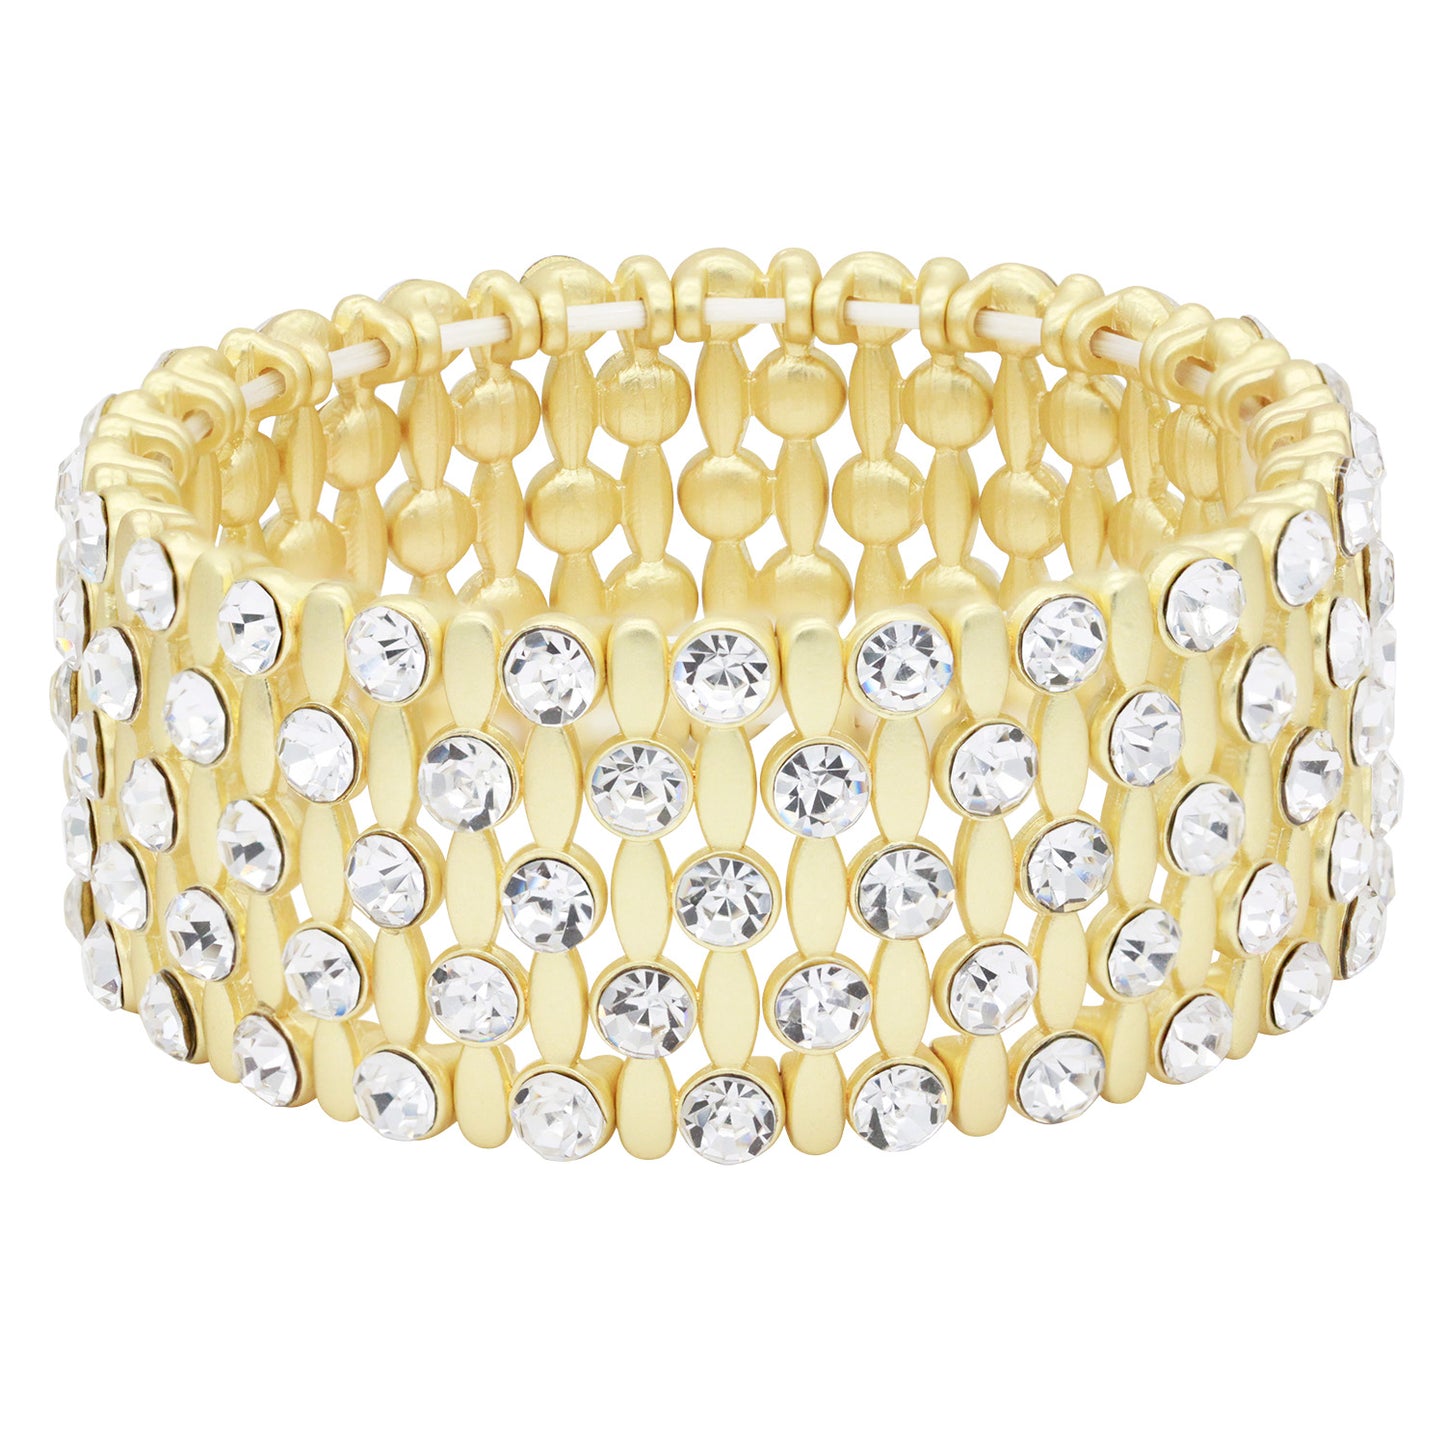 Lavencious Classic Design Elastic Stretch Bracelet Paved with Rhinestones Bridal Wedding Jewelry for Women 7"(Matte Gold)